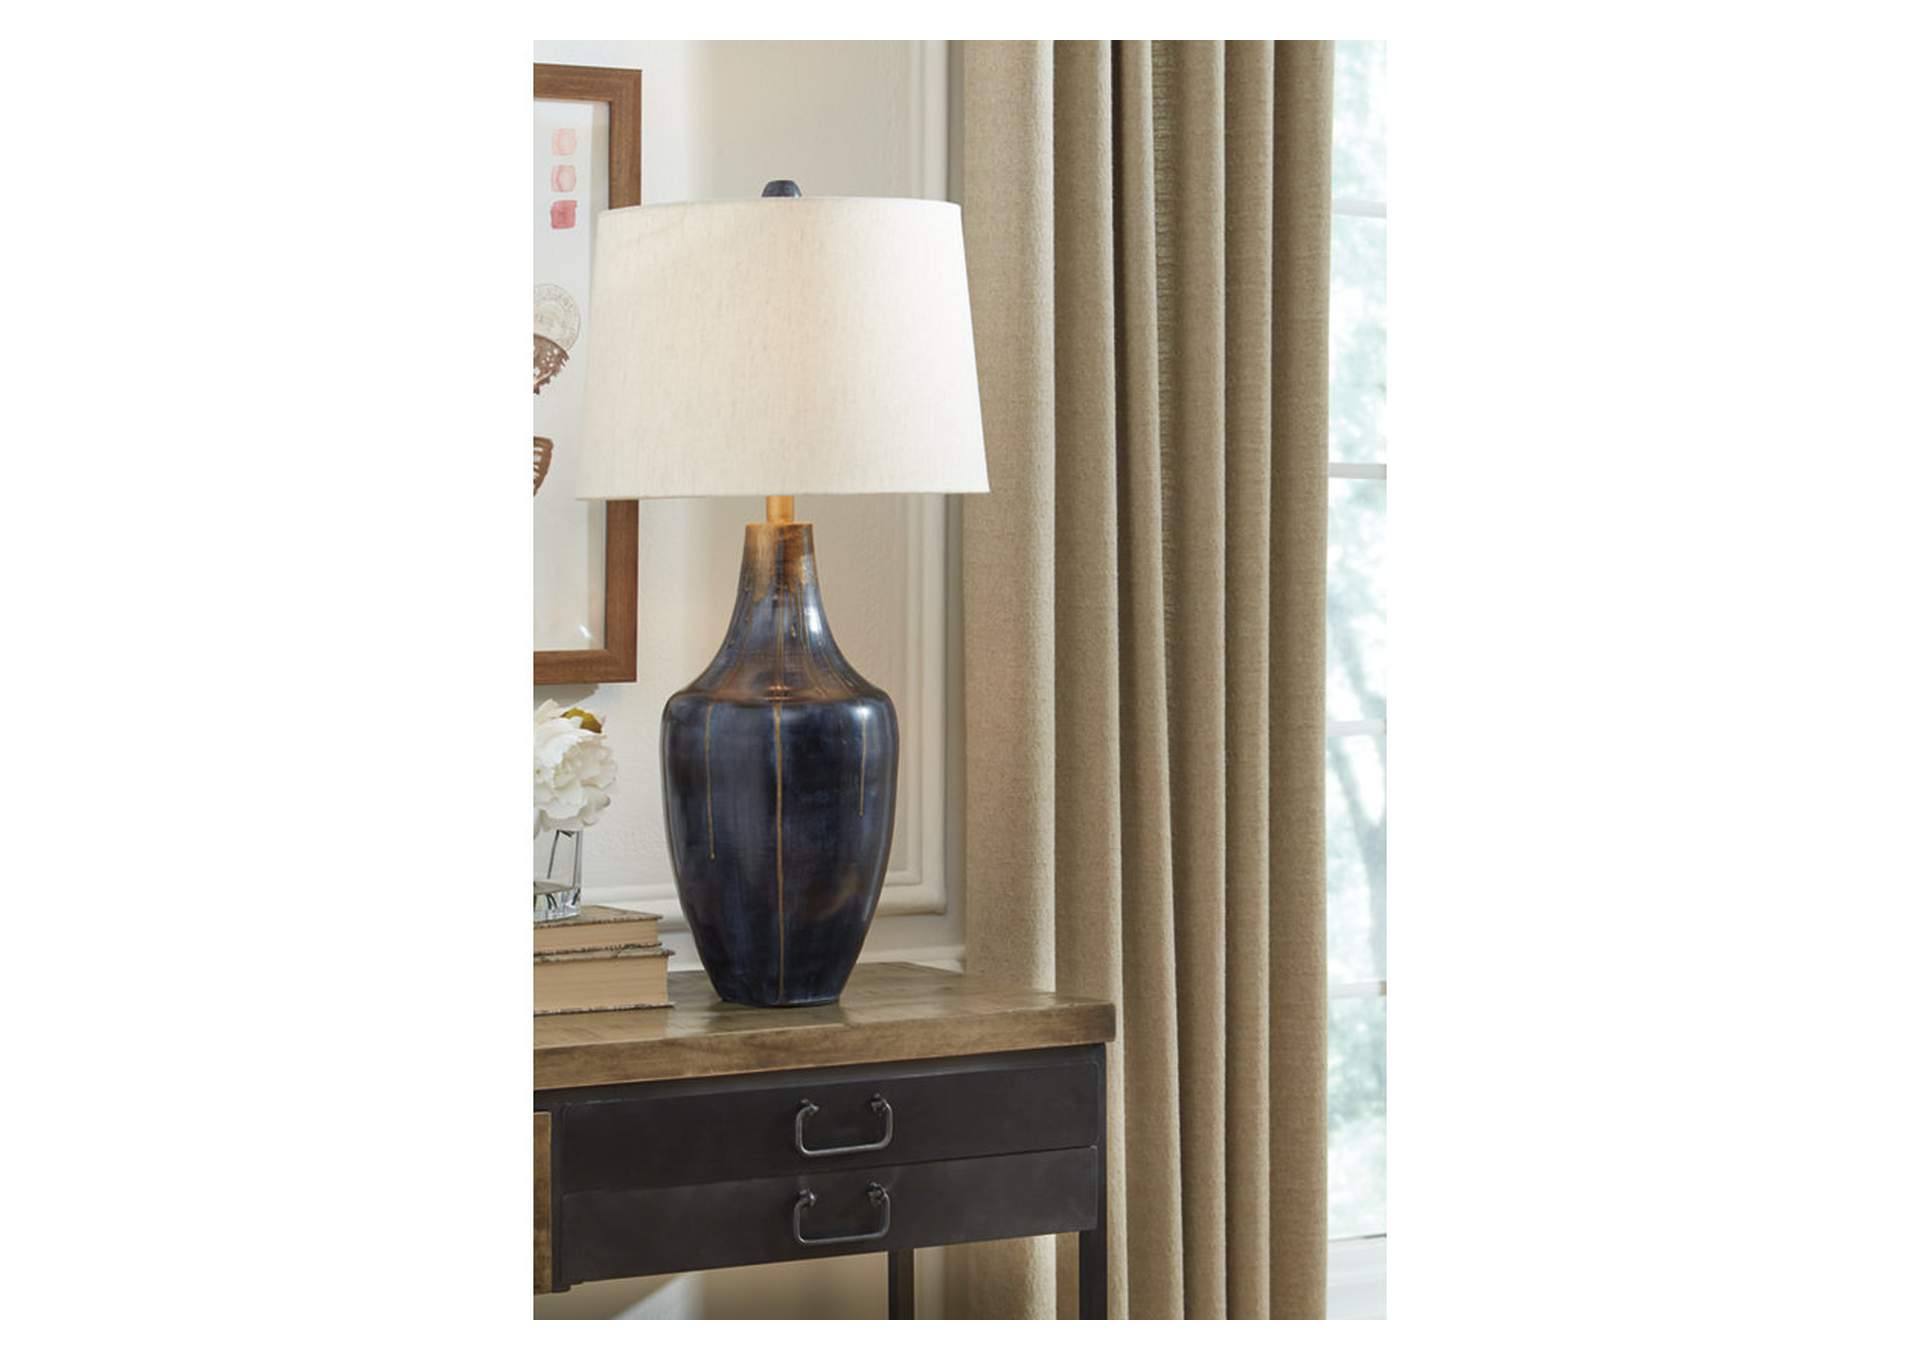 Evania Purple Table Lamp,Direct To Consumer Express